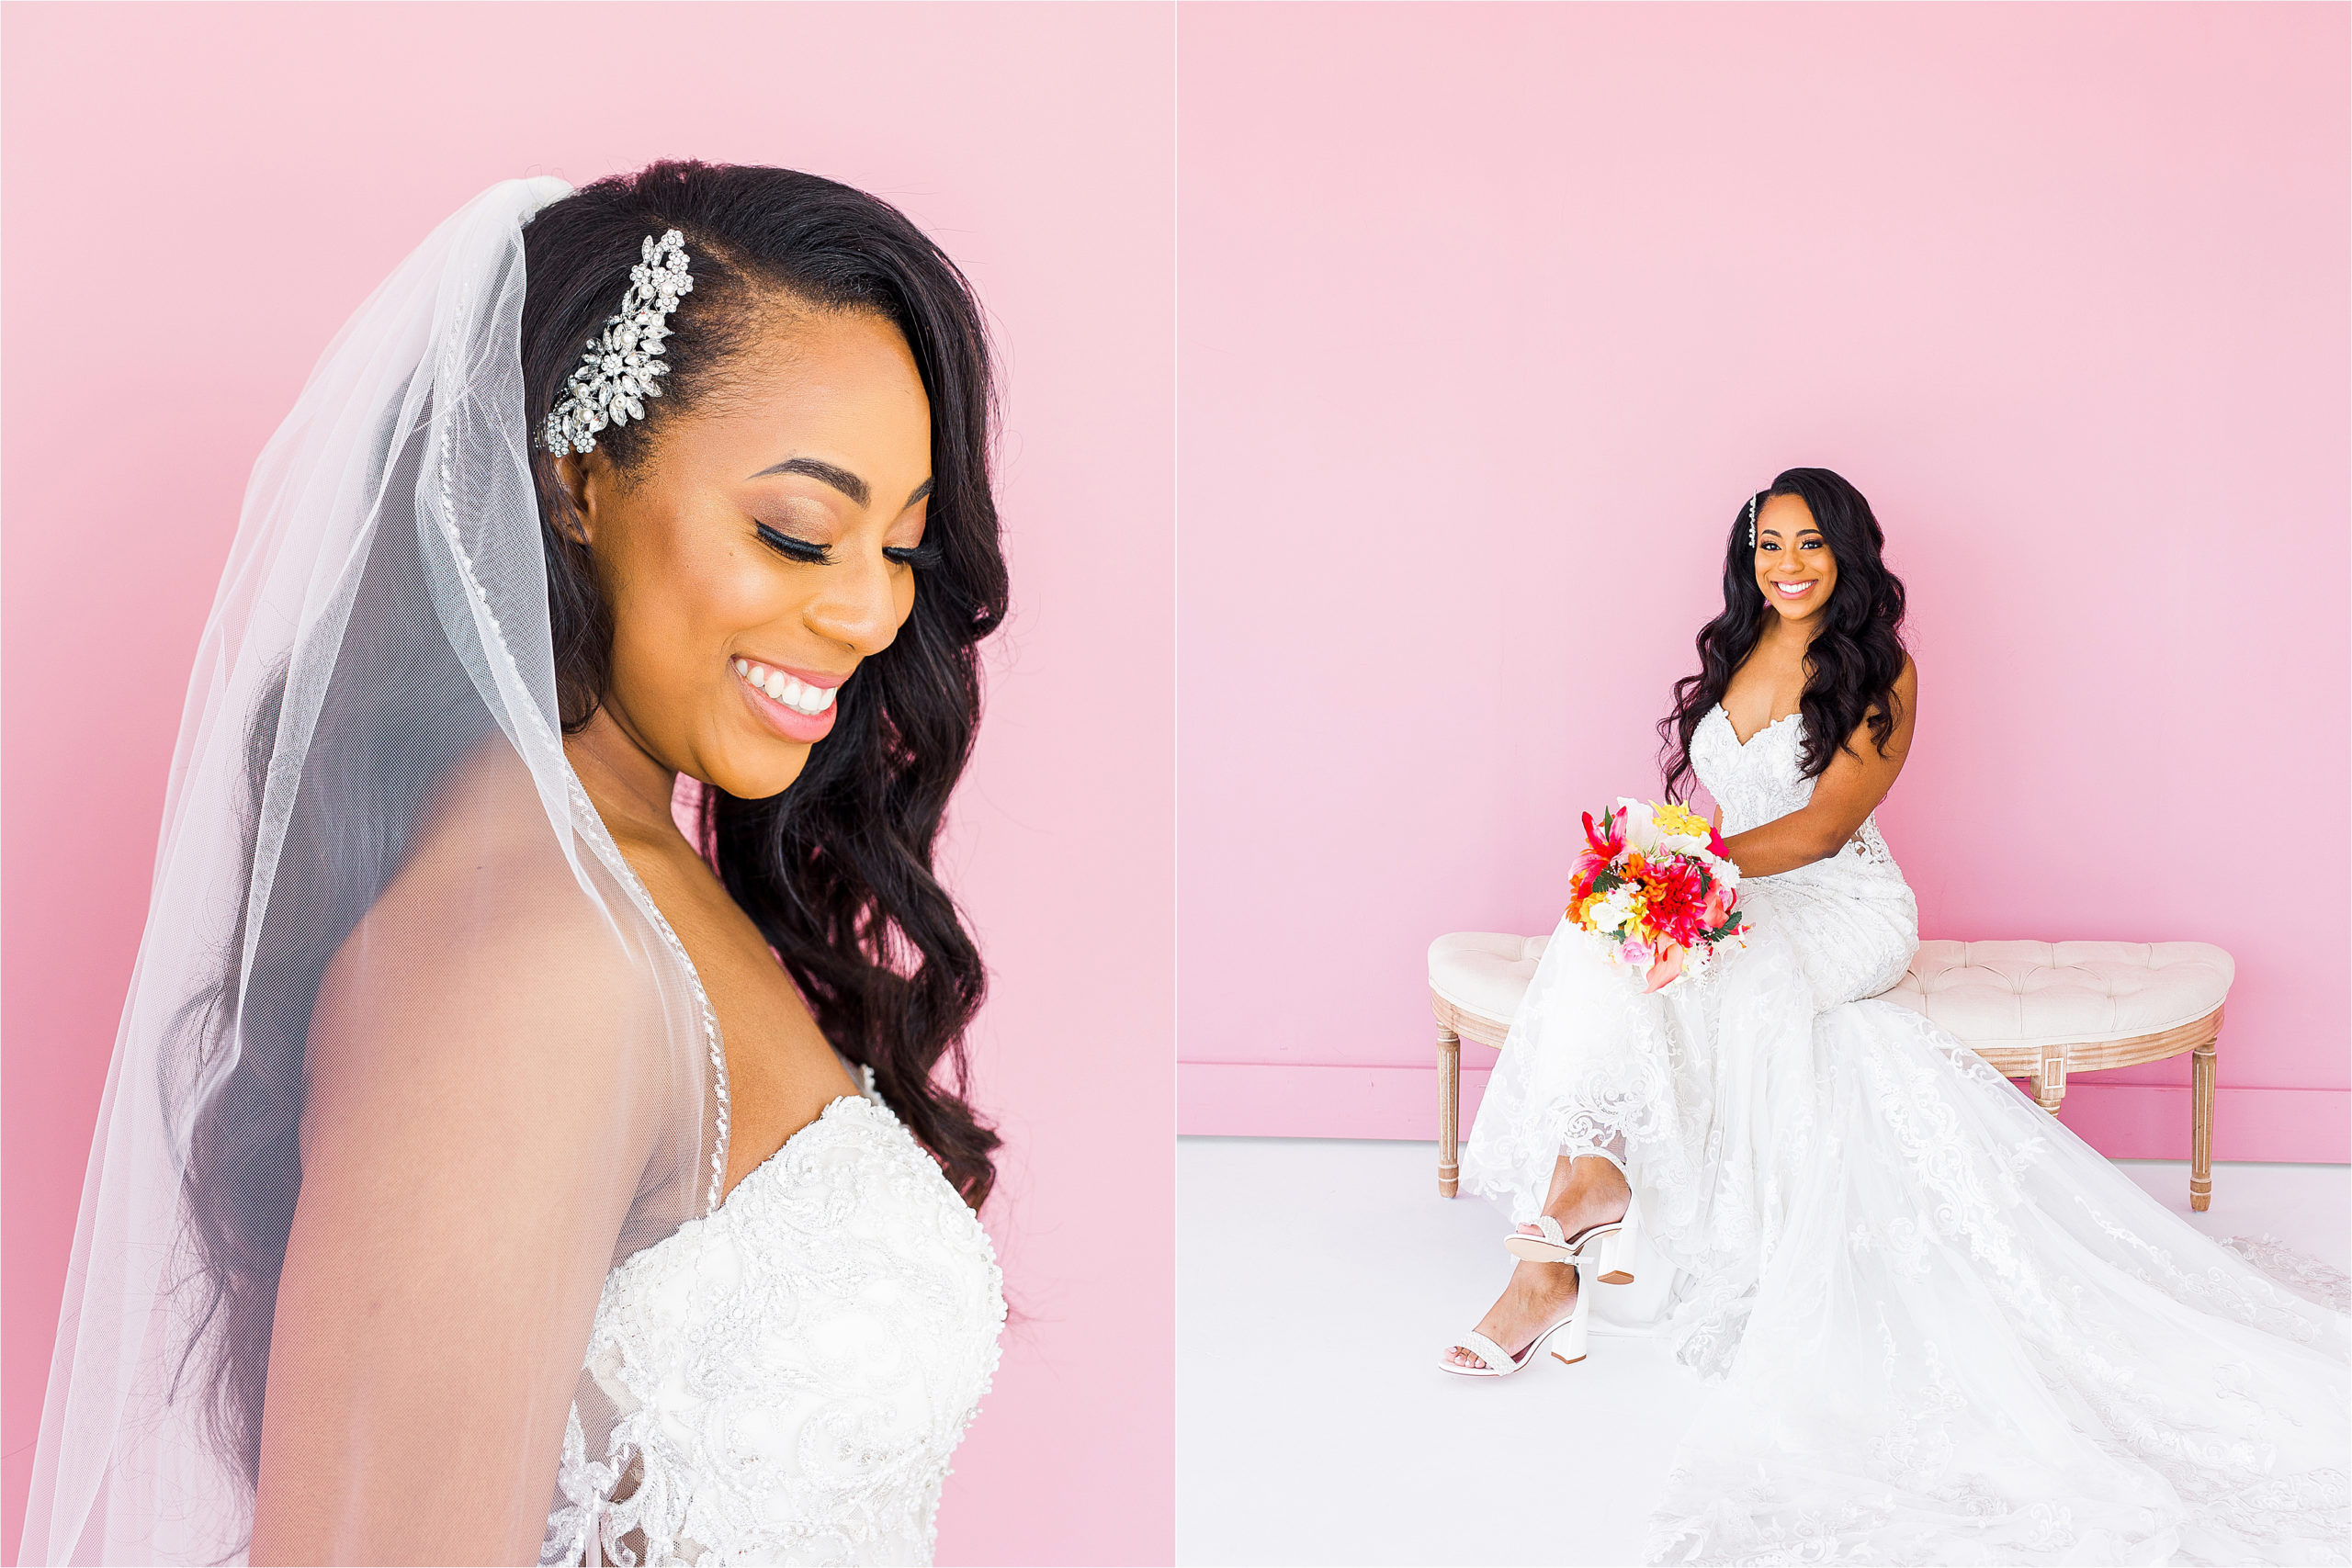 Details of a brides veil and headpiece as she gazes down and sits cross-legged on a bench in front of a bright pink backdrop at her studio bridal session in San Antonio, Texas